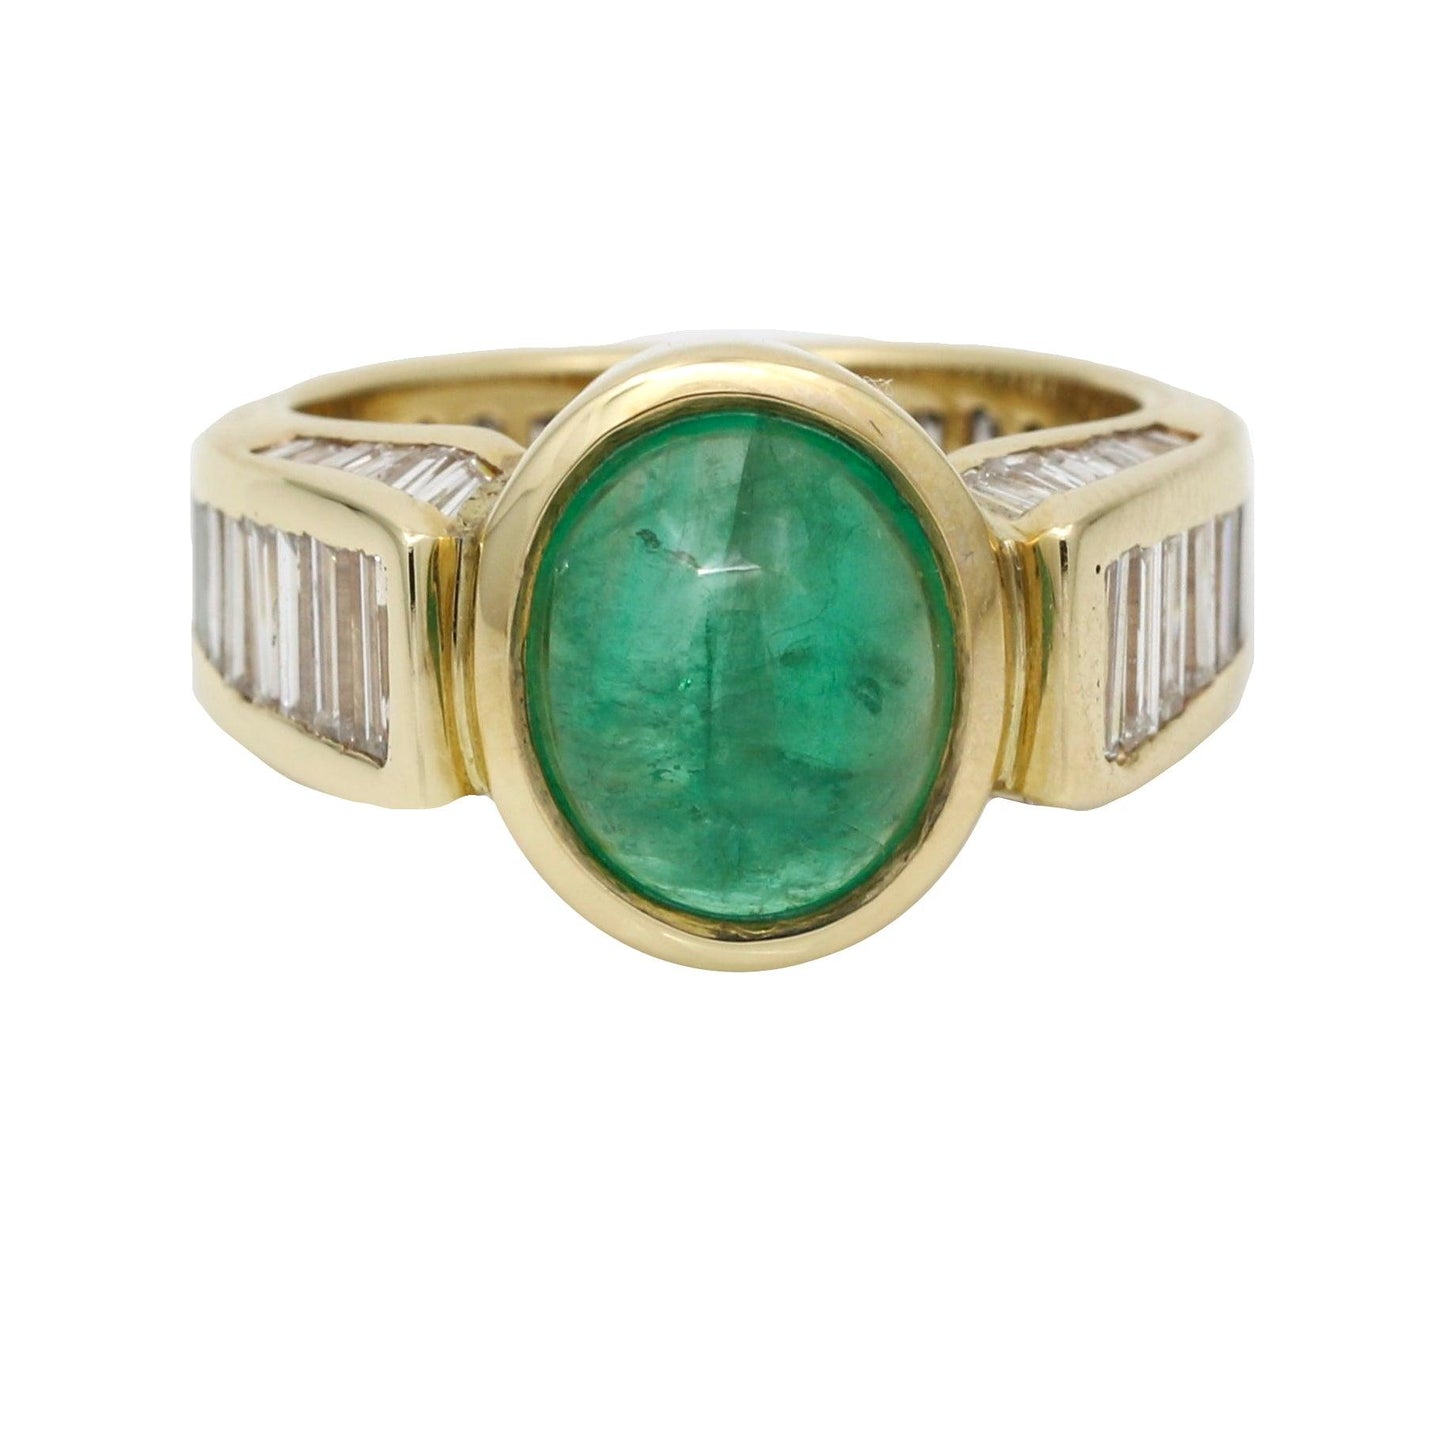 Cabochon Colombian Emerald Diamond Statement Ring in 14k Yellow Gold - 31 Jewels Inc.